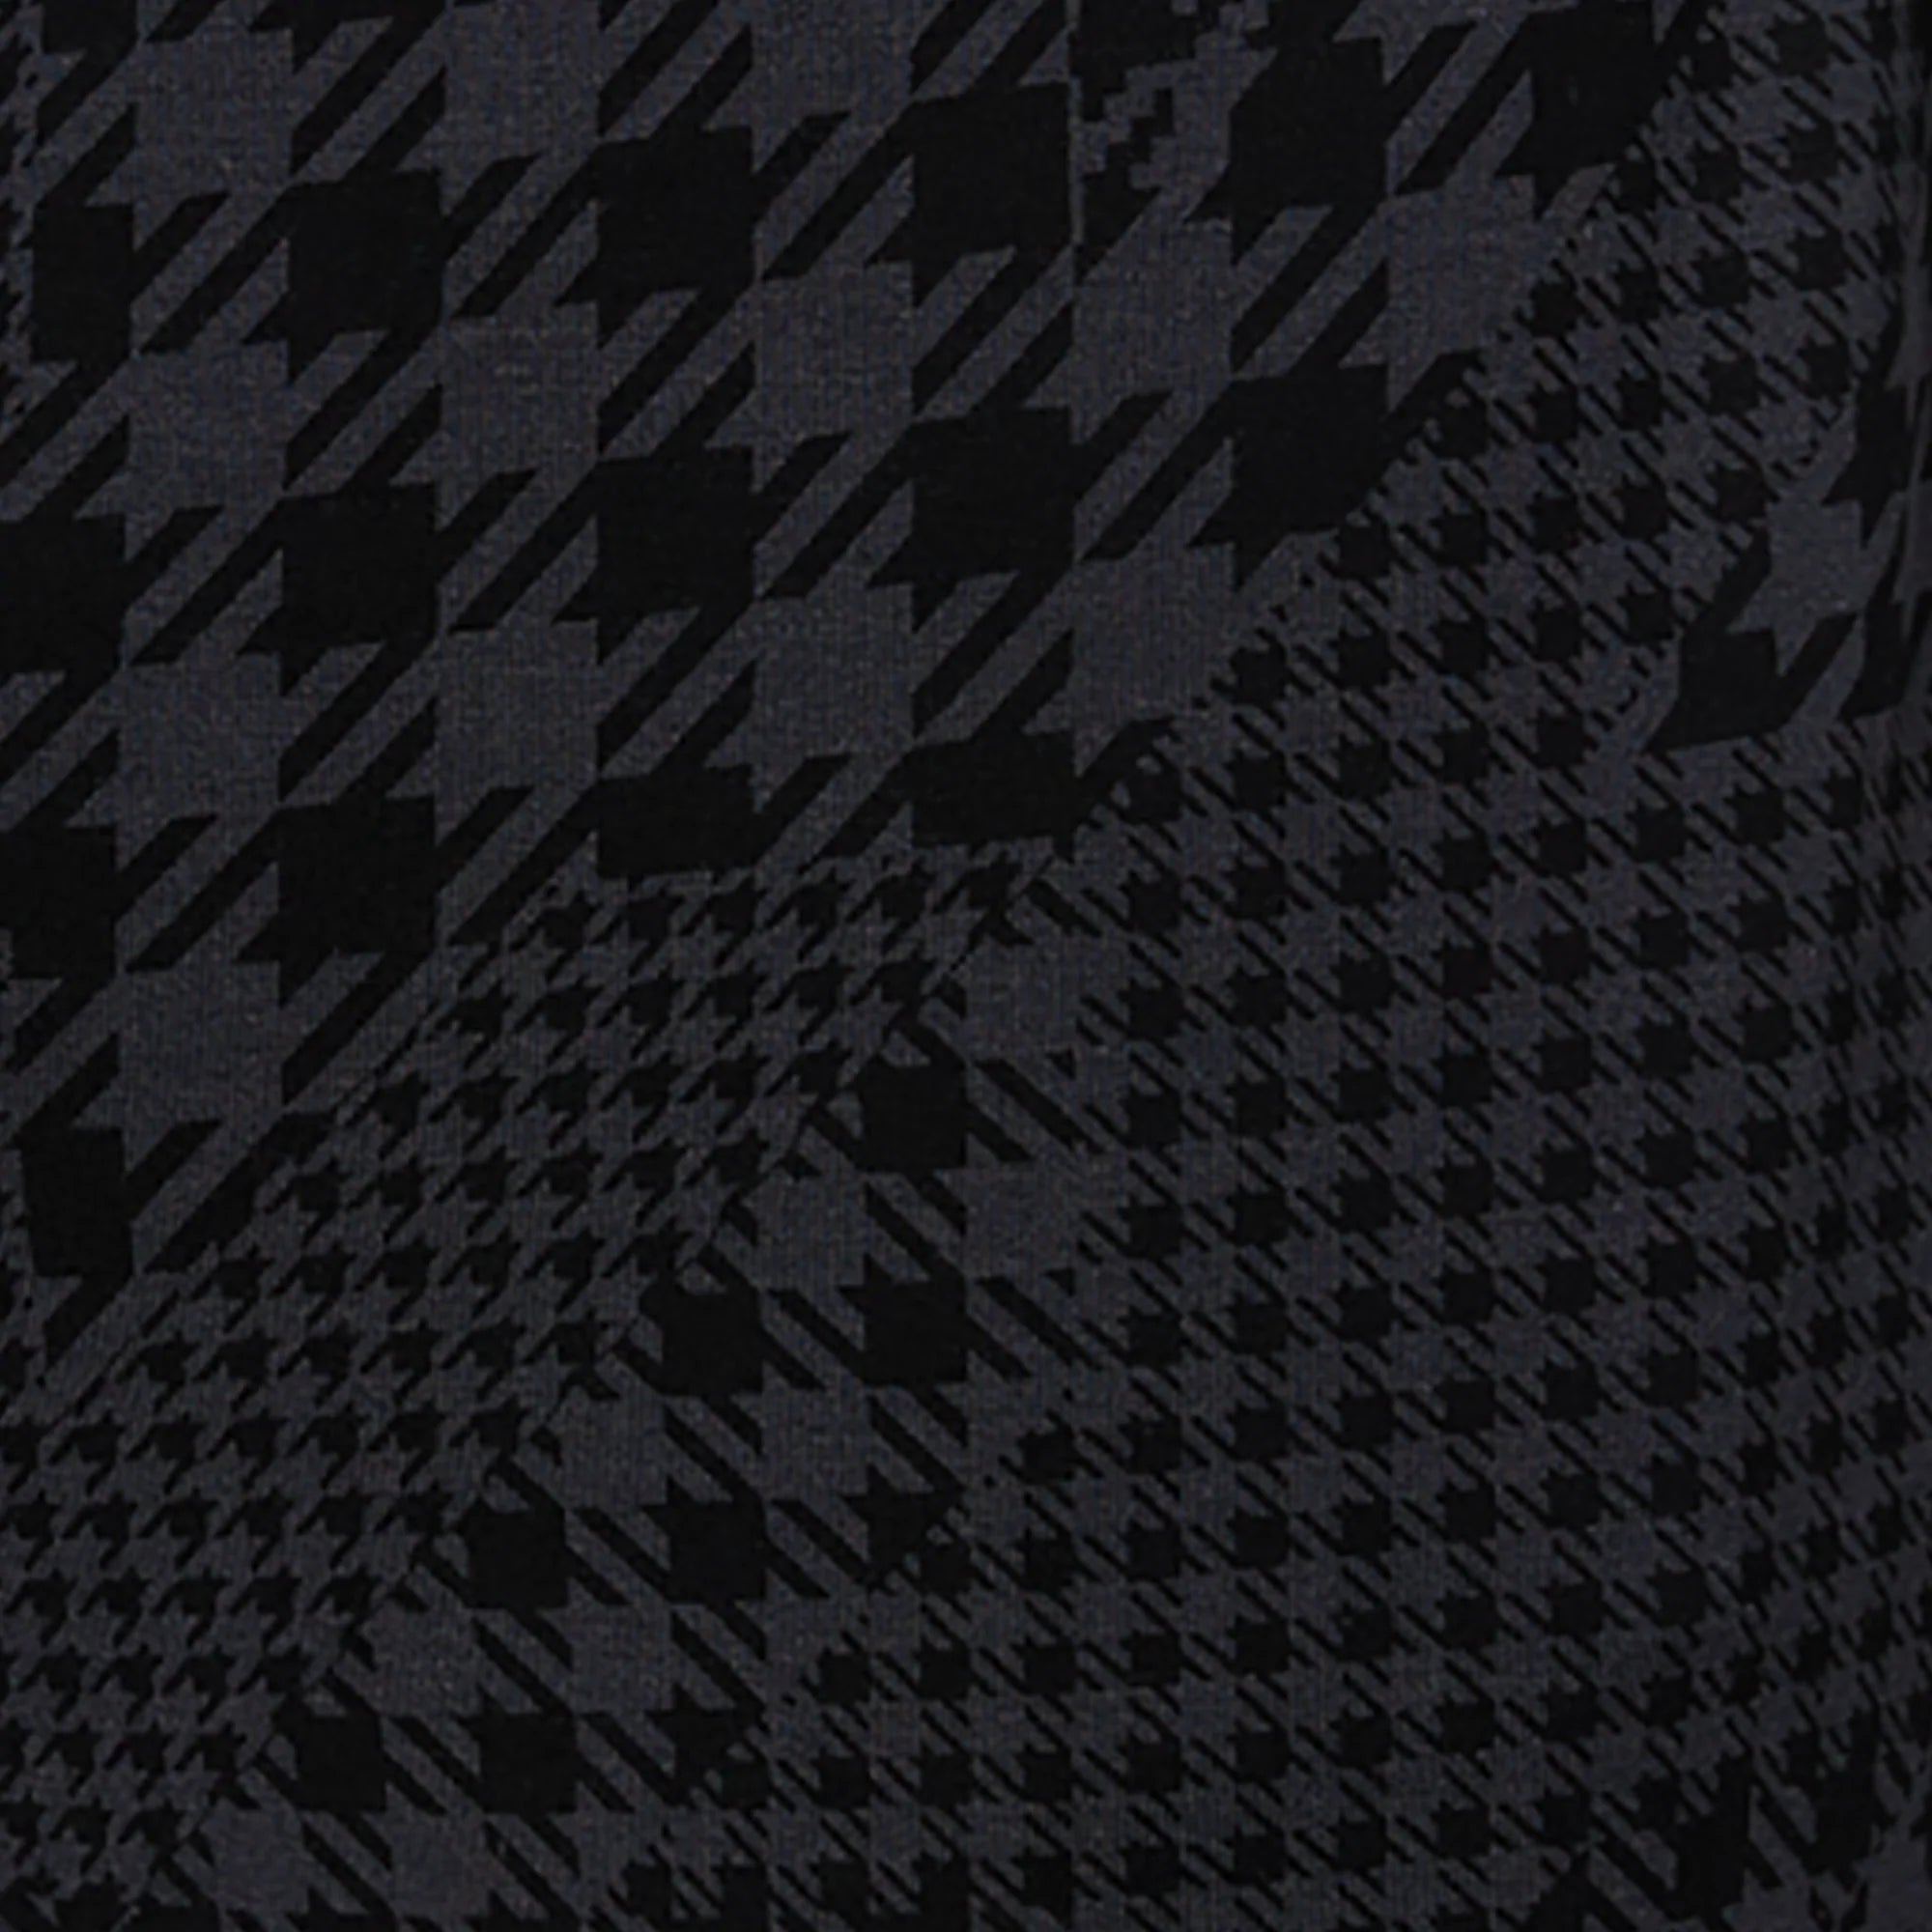 Swatch of Dogstooth Camo- Black